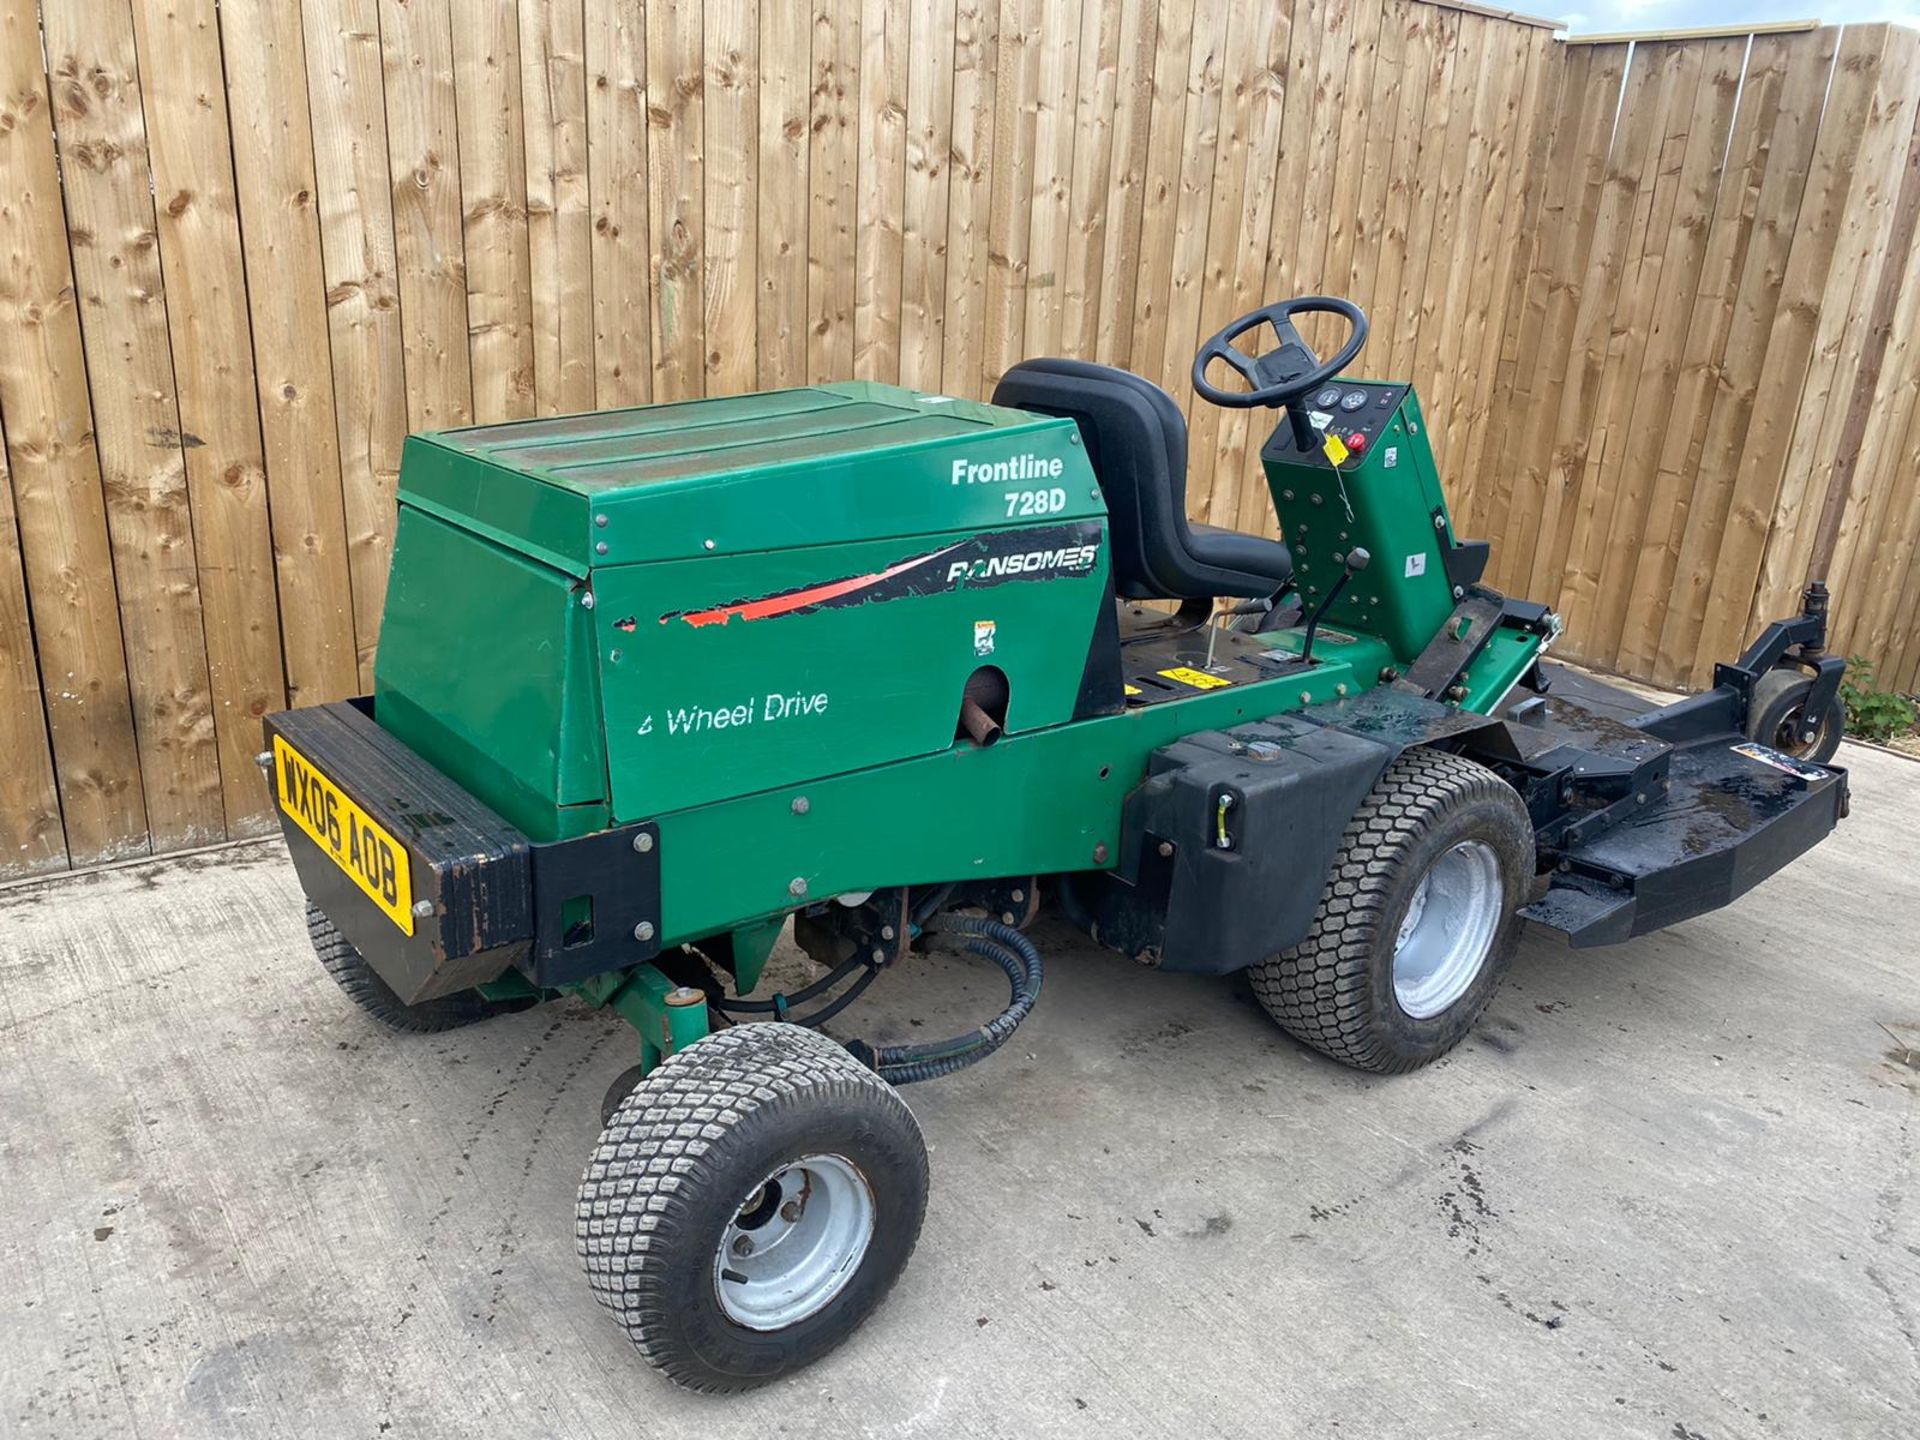 RANSOMES 728D DIESEL OUT FRONT MOWER ROAD REGISTERED LOCATION NOTH YORKSHIRE - Image 5 of 7